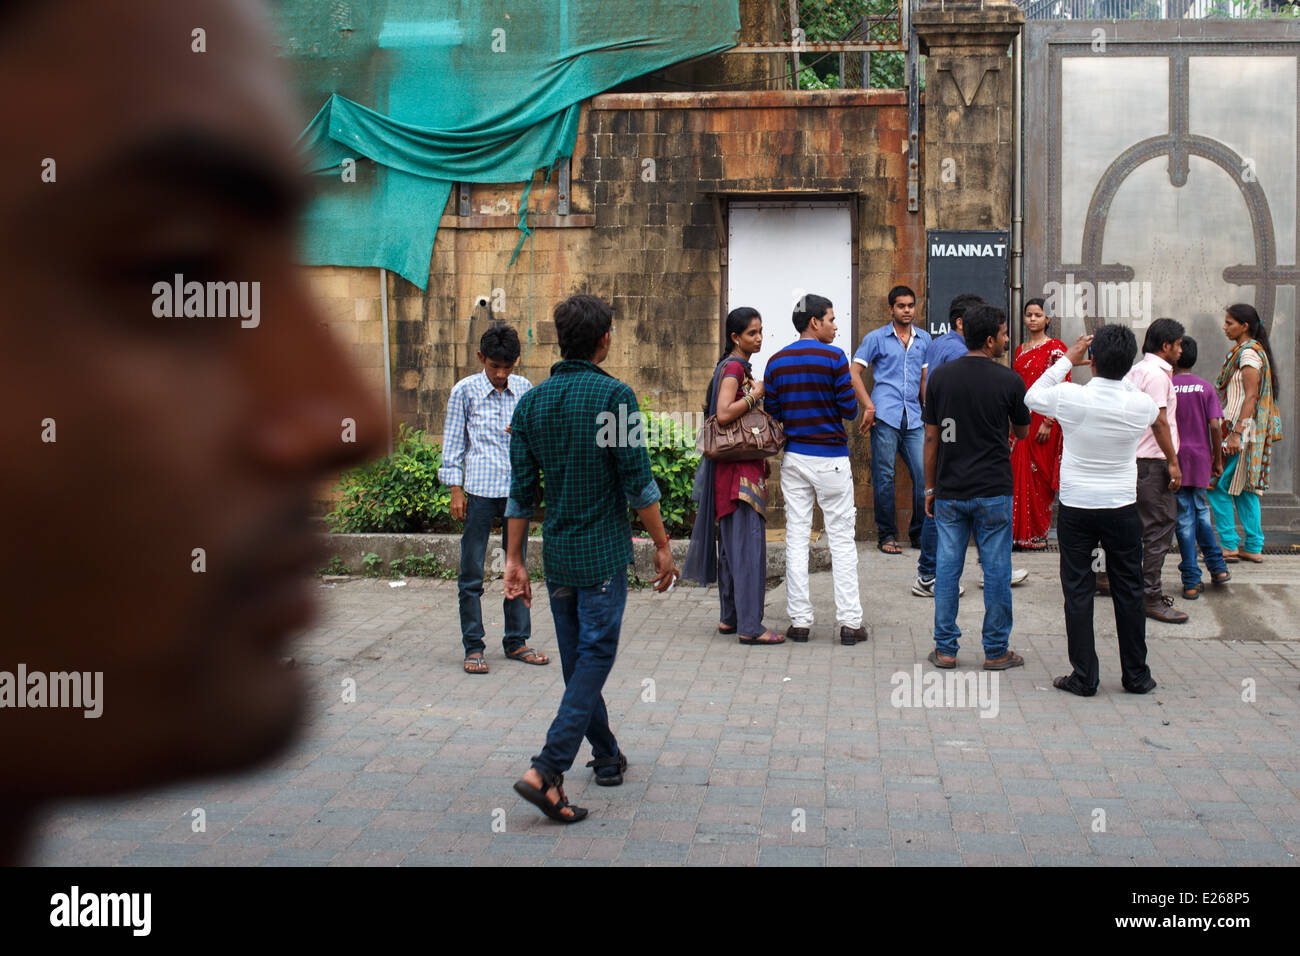 People congregating and taking pictures outside Indian Bollywood film actor Shahrukh Khan' house called Mannat in Bandra, Mumbai Stock Photo